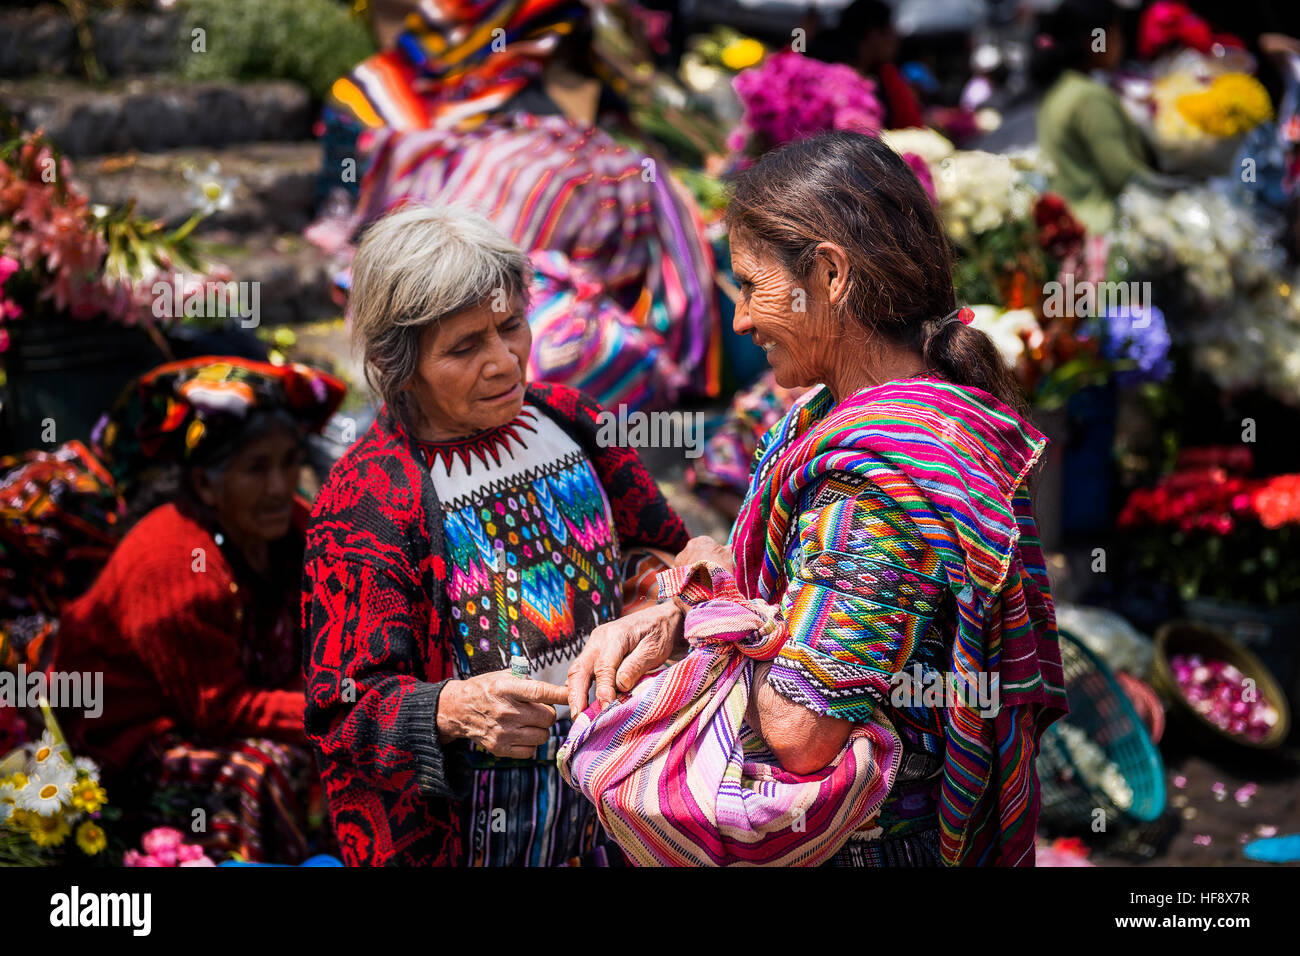 Chichicastenango, Guatemala - April 27, 2014: Two local women wearing traditional clothing in a market in Chichicastenango. Stock Photo